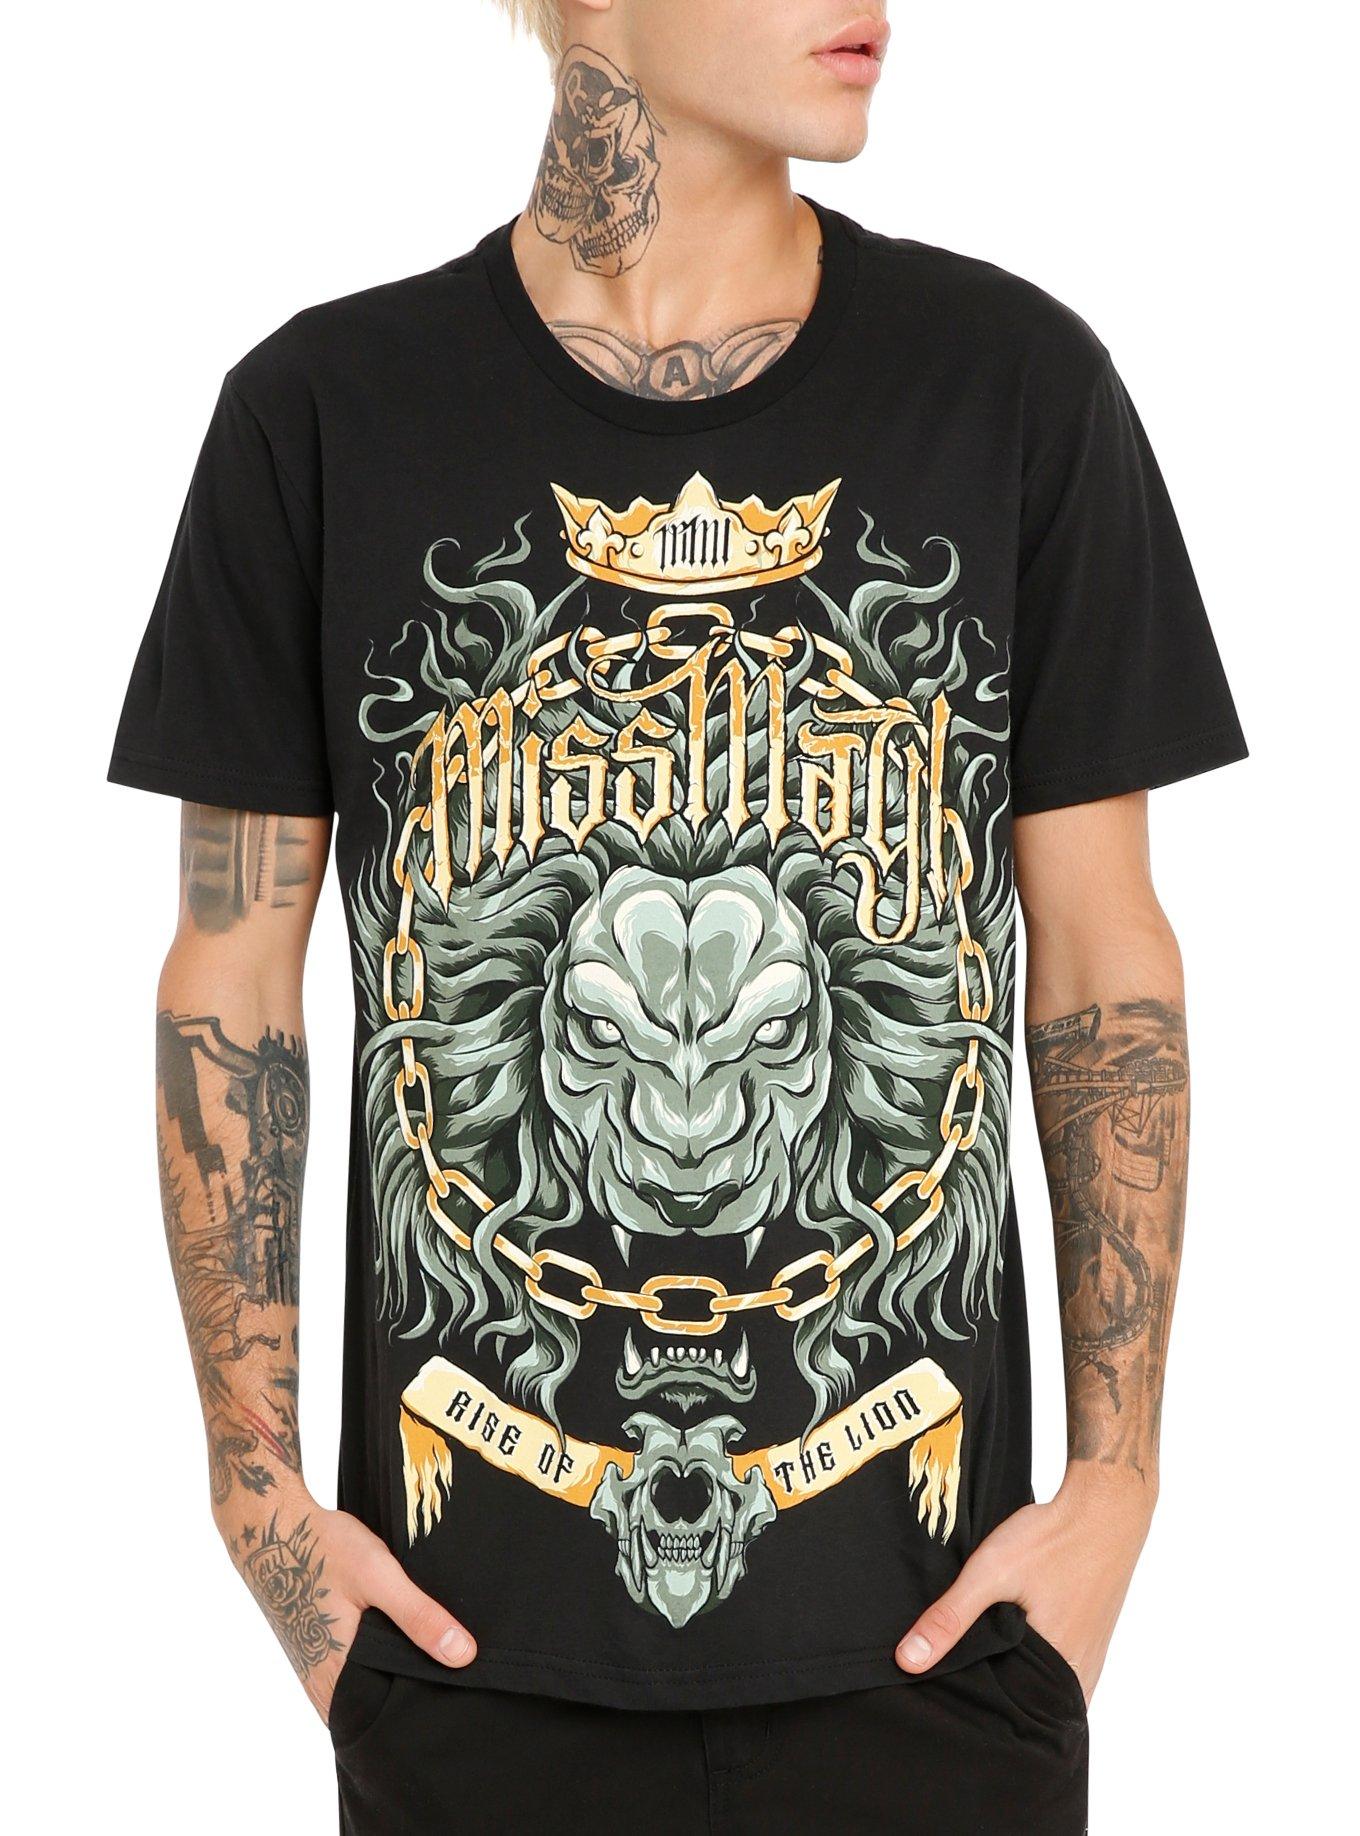 Miss May I Rise Of The Lion T-Shirt, BLACK, hi-res